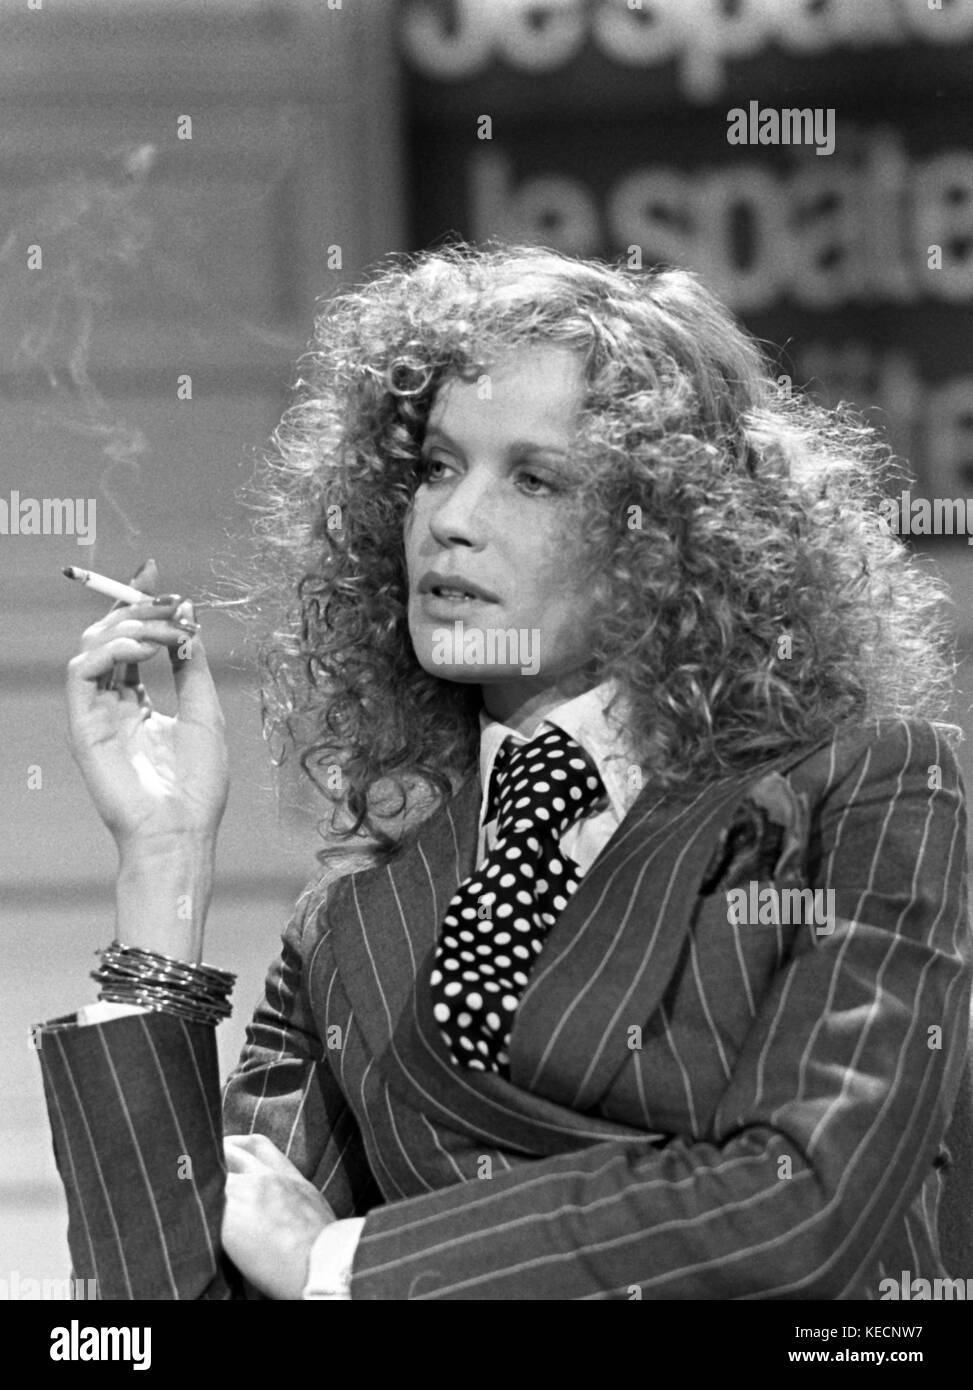 Germany's first supermodel Veruschka Duchess Lehndorff attended a local television show hosted by Hansjuergen Rosenbauer on 15 January 1975. | usage worldwide Stock Photo